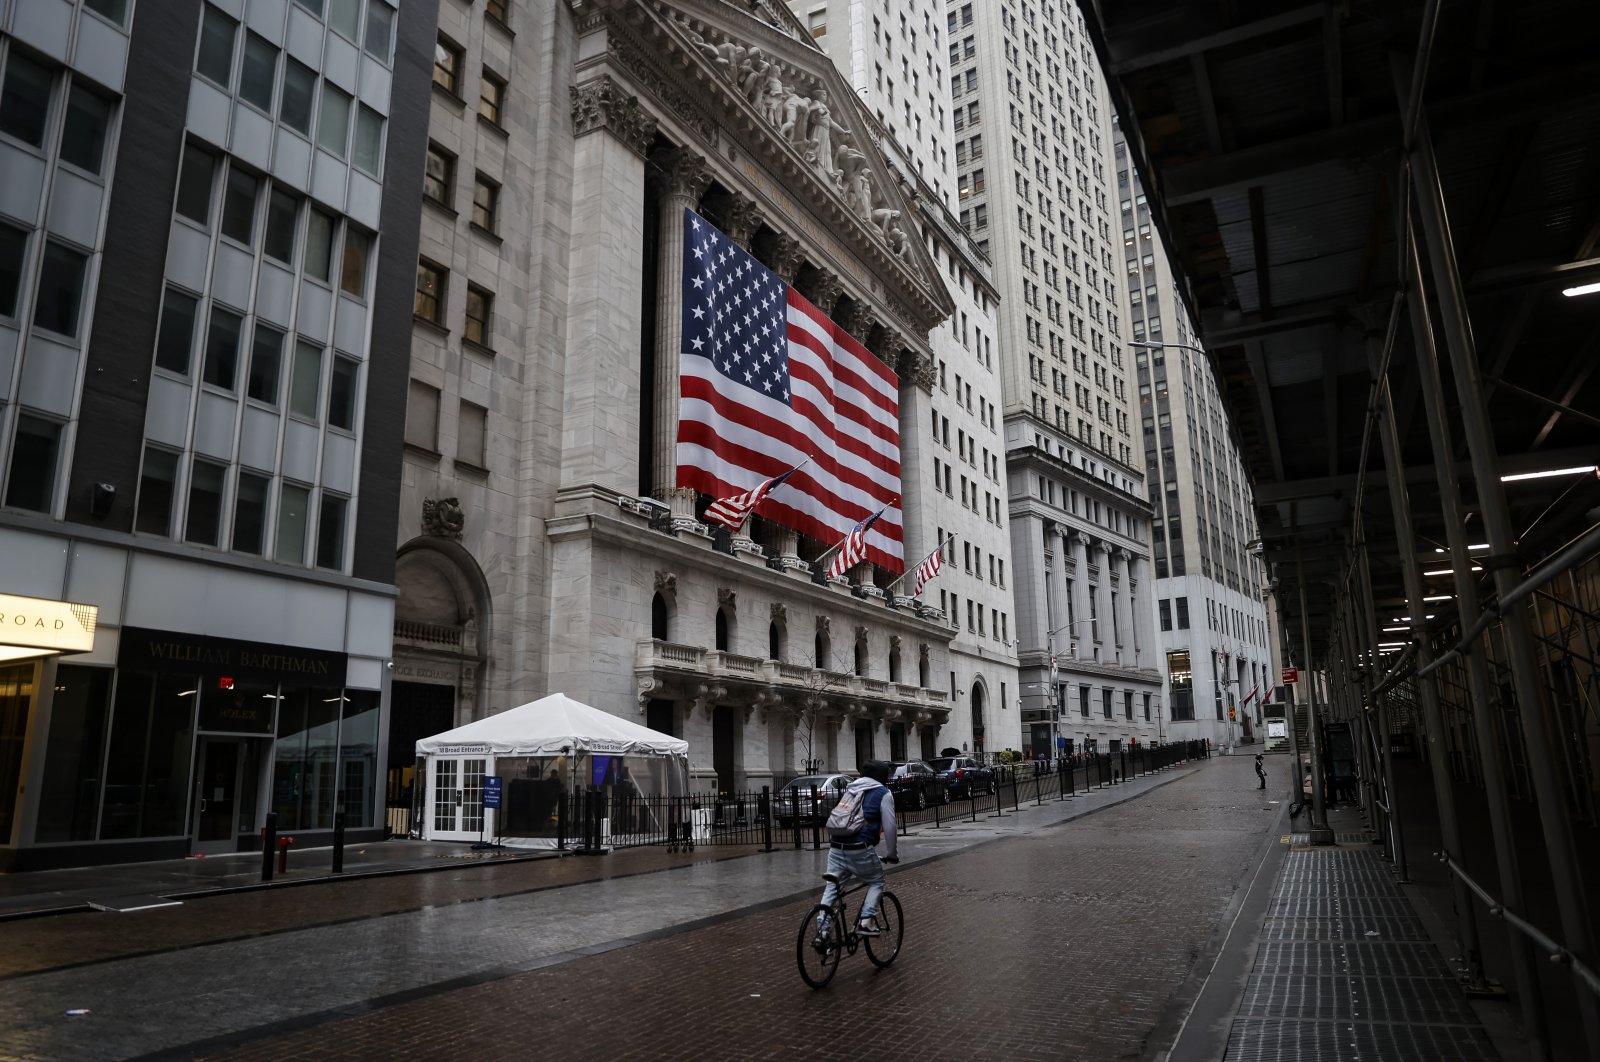 A man rides his bike  in front of  the New York Stock Exchange in New York City, New York, March 23, 2020. (REUTERS Photo)